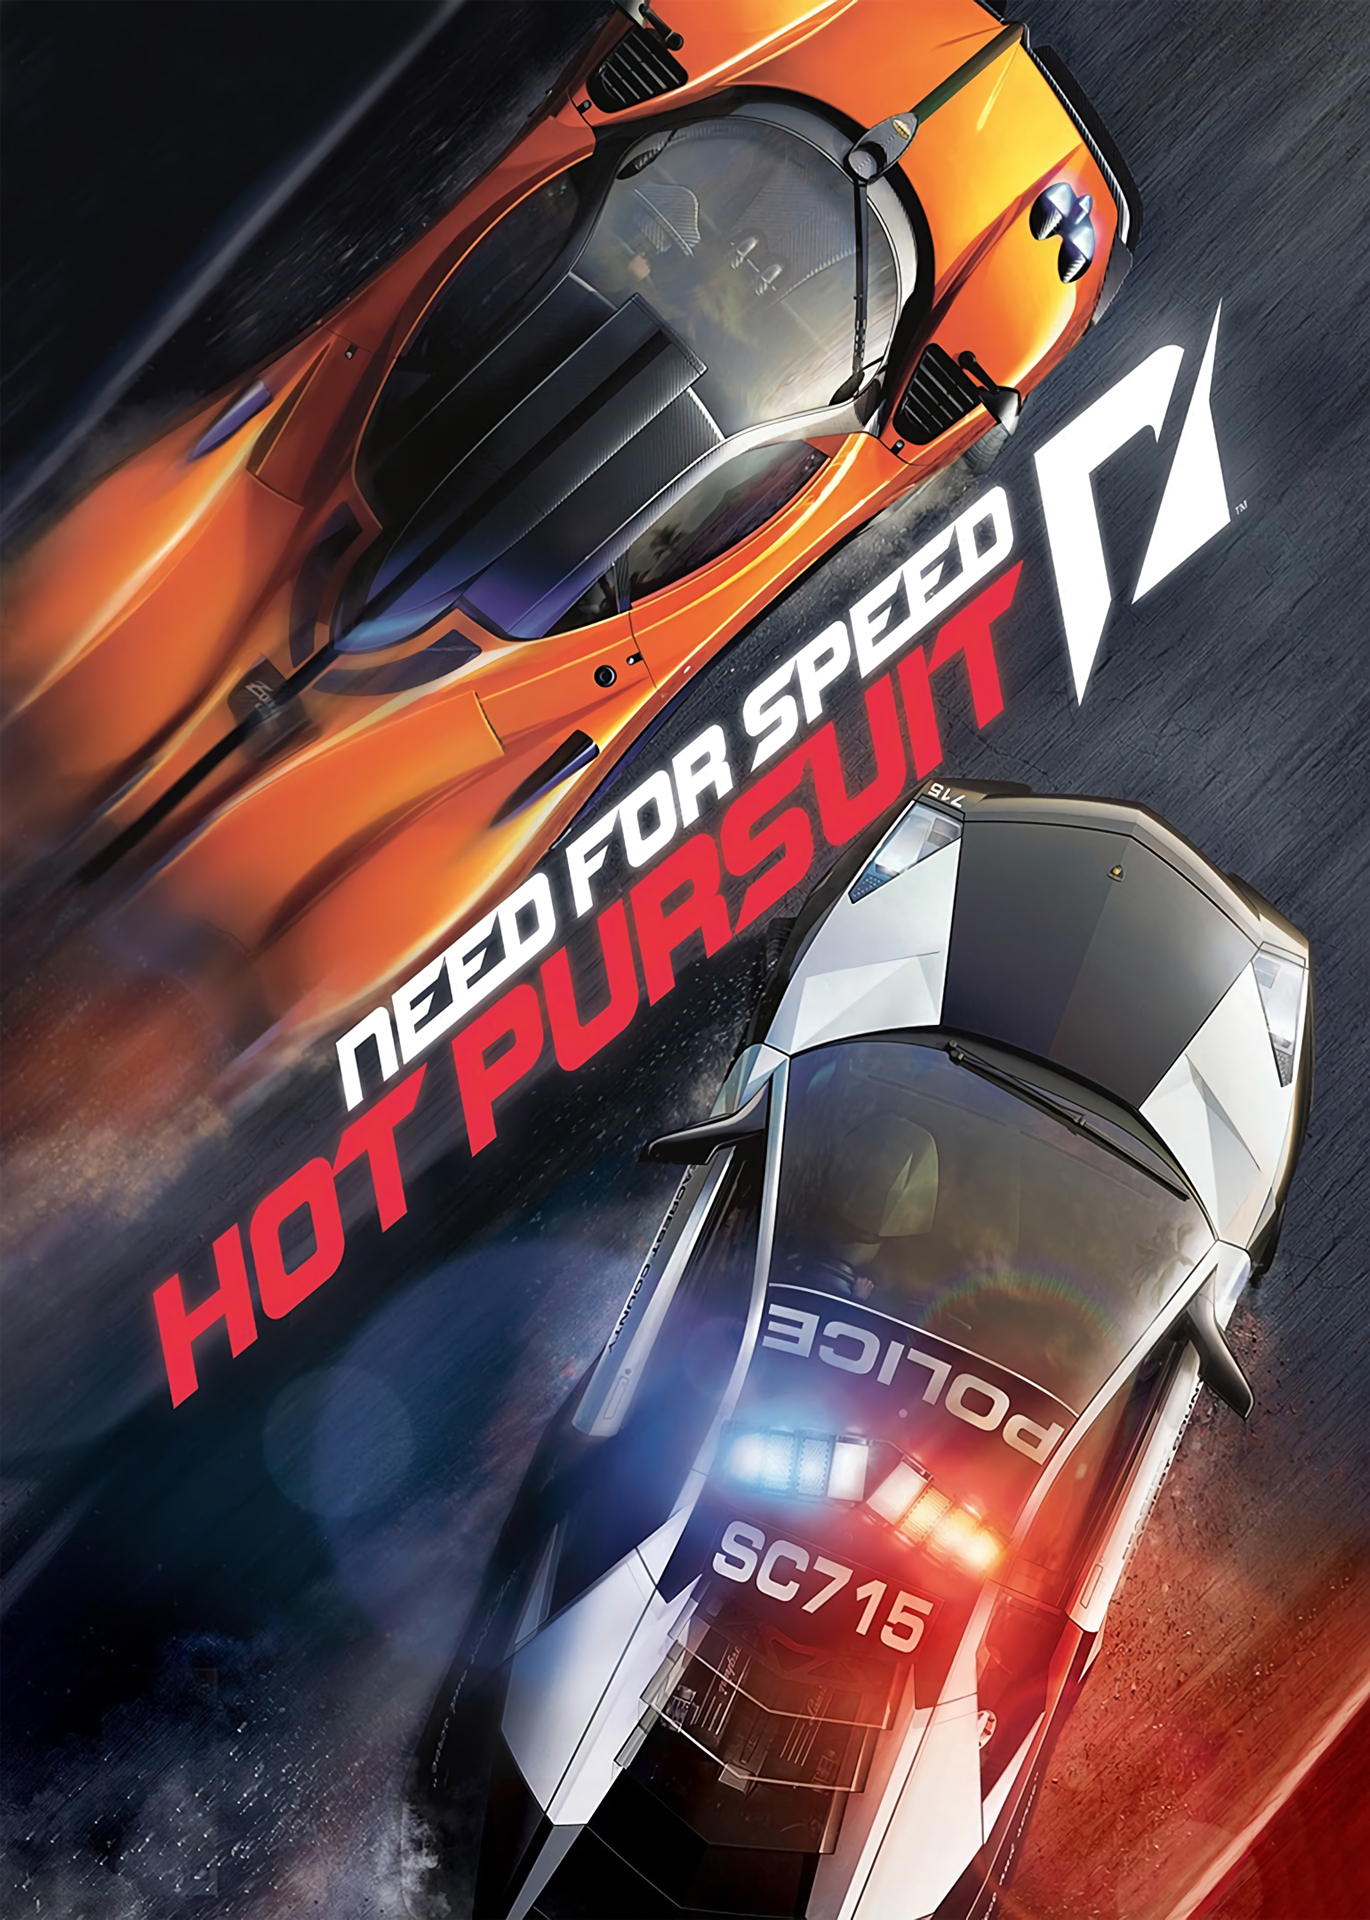 Game review] “ Need For Speed Hot Pursuit – Eagle Crest